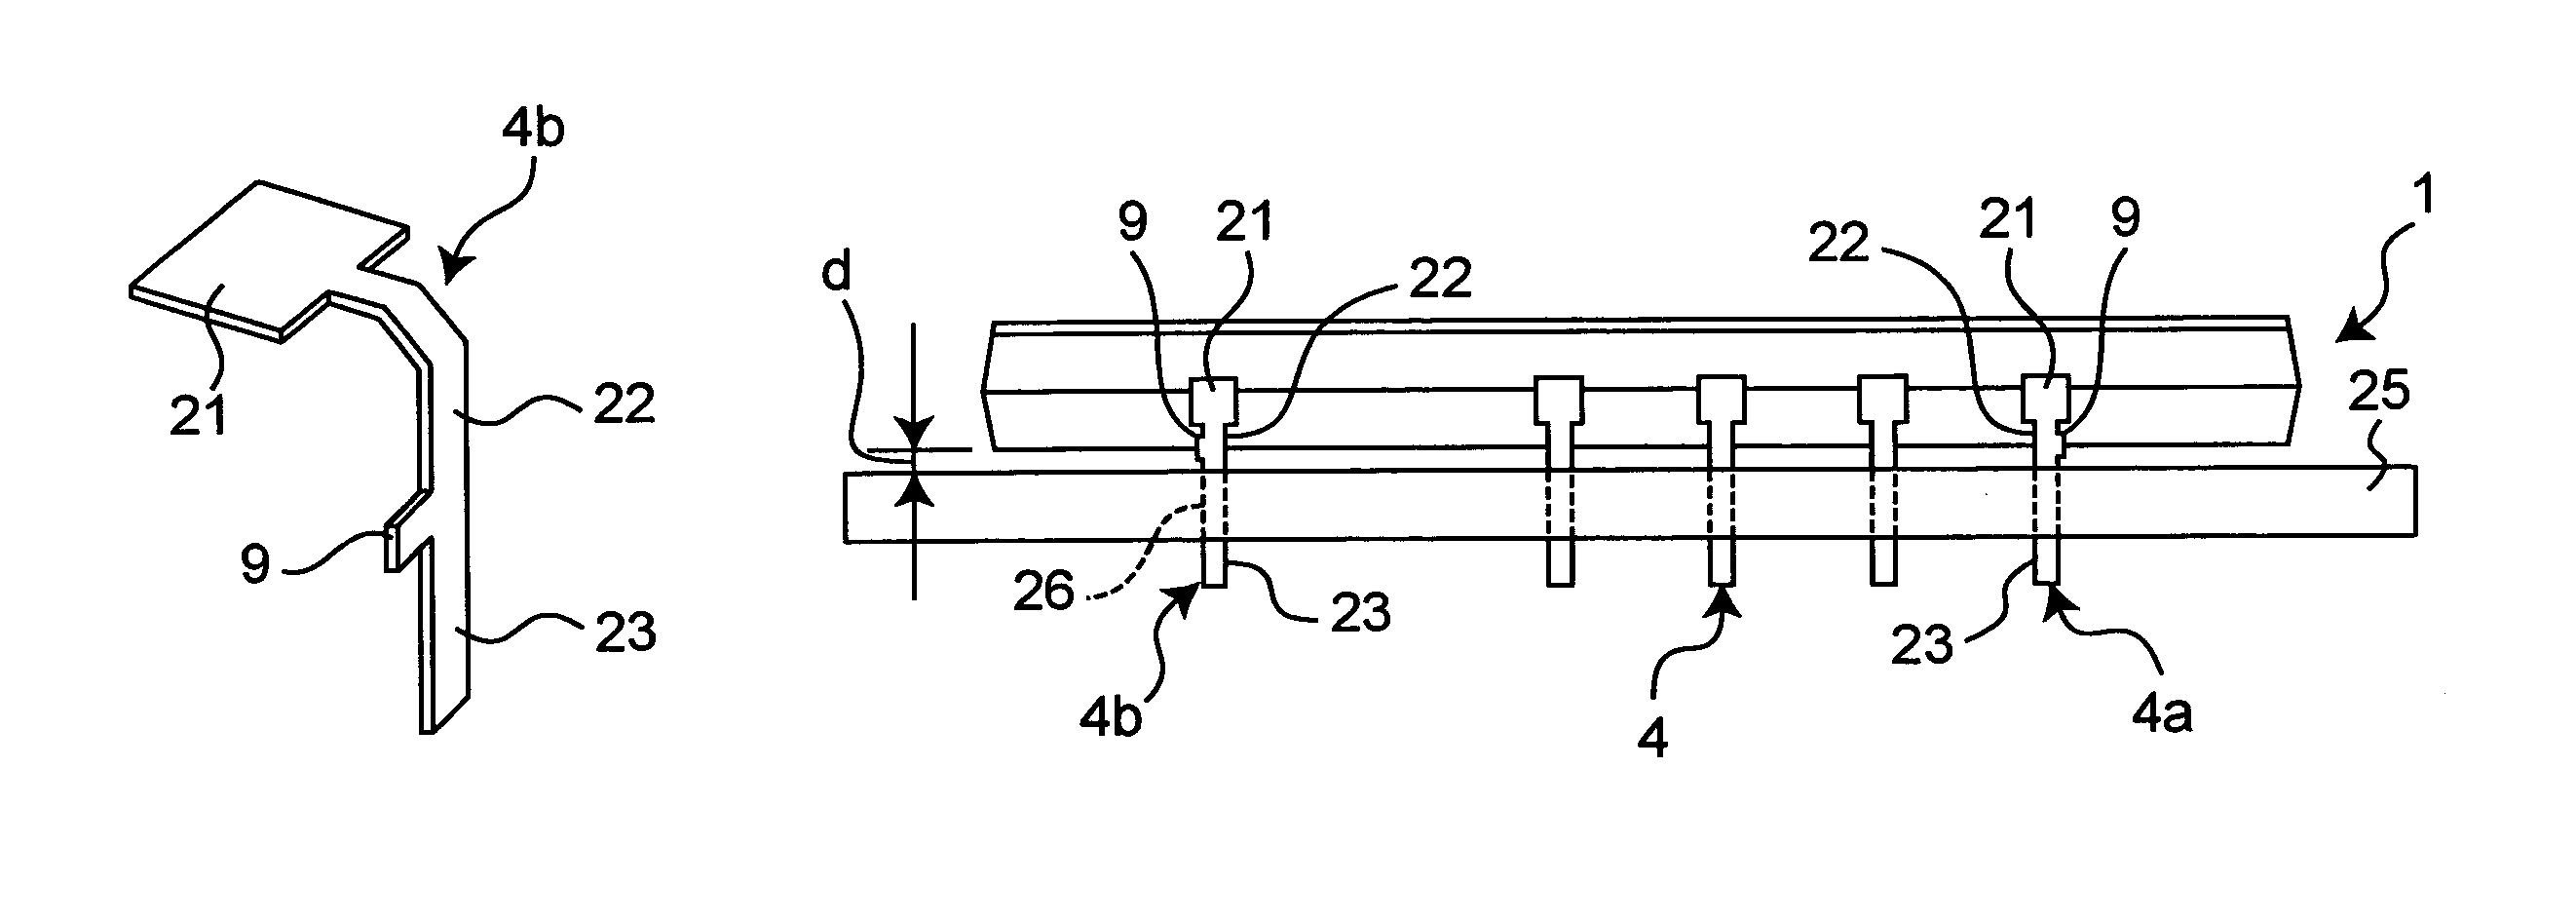 Semiconductor device and semiconductor assembly module with a gap-controlling lead structure